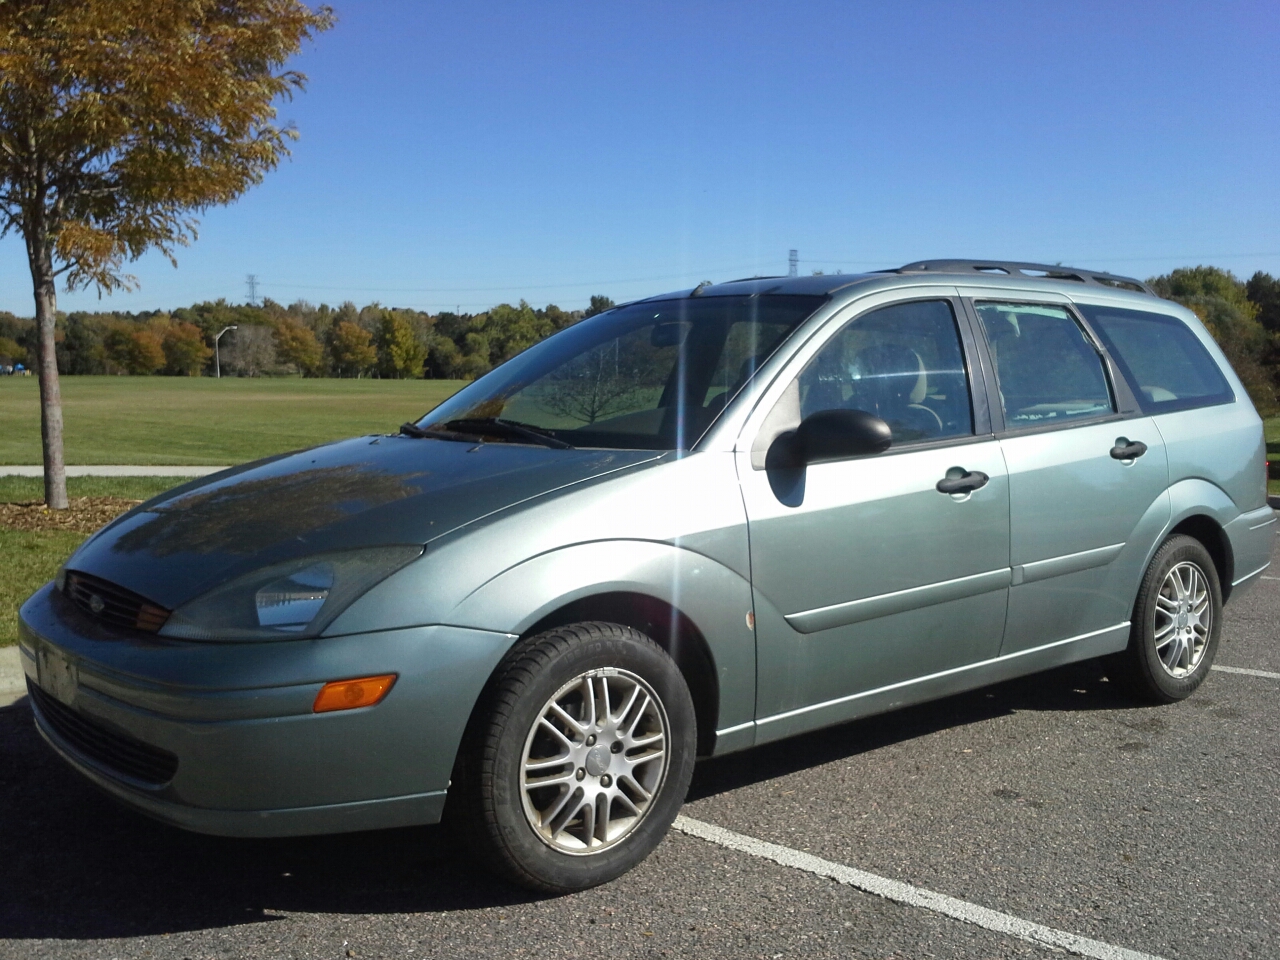 2003 Ford focus ztw wagon review #5